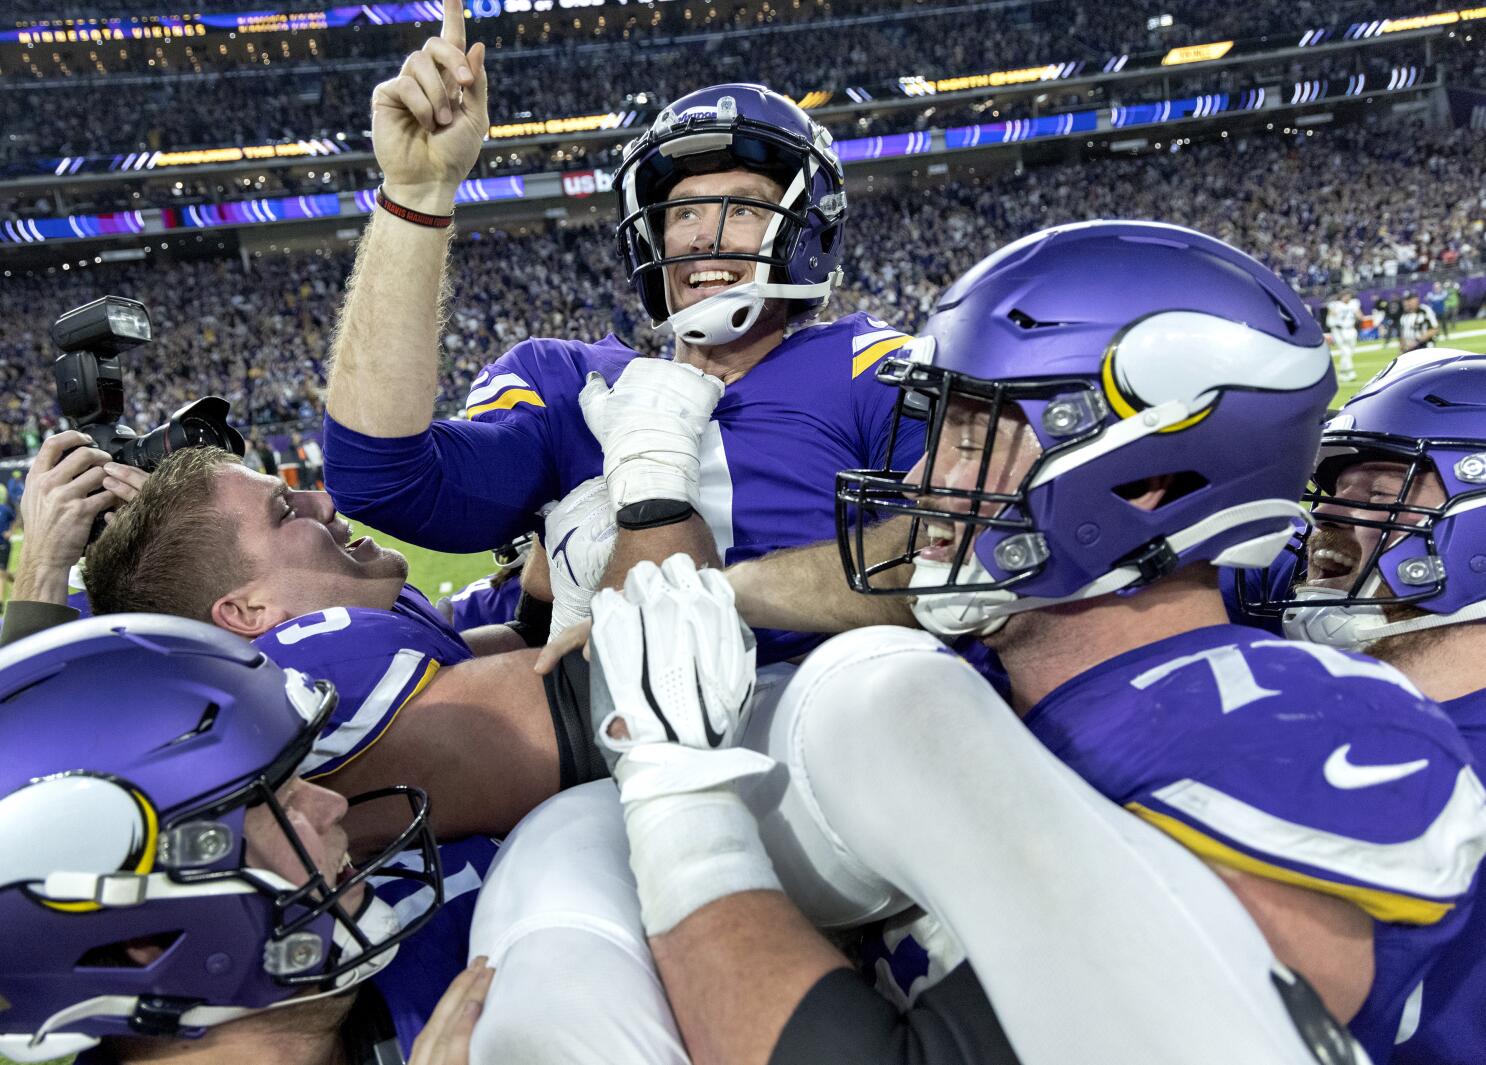 Vikings Beat Colts for Biggest Comeback in NFL History - The New